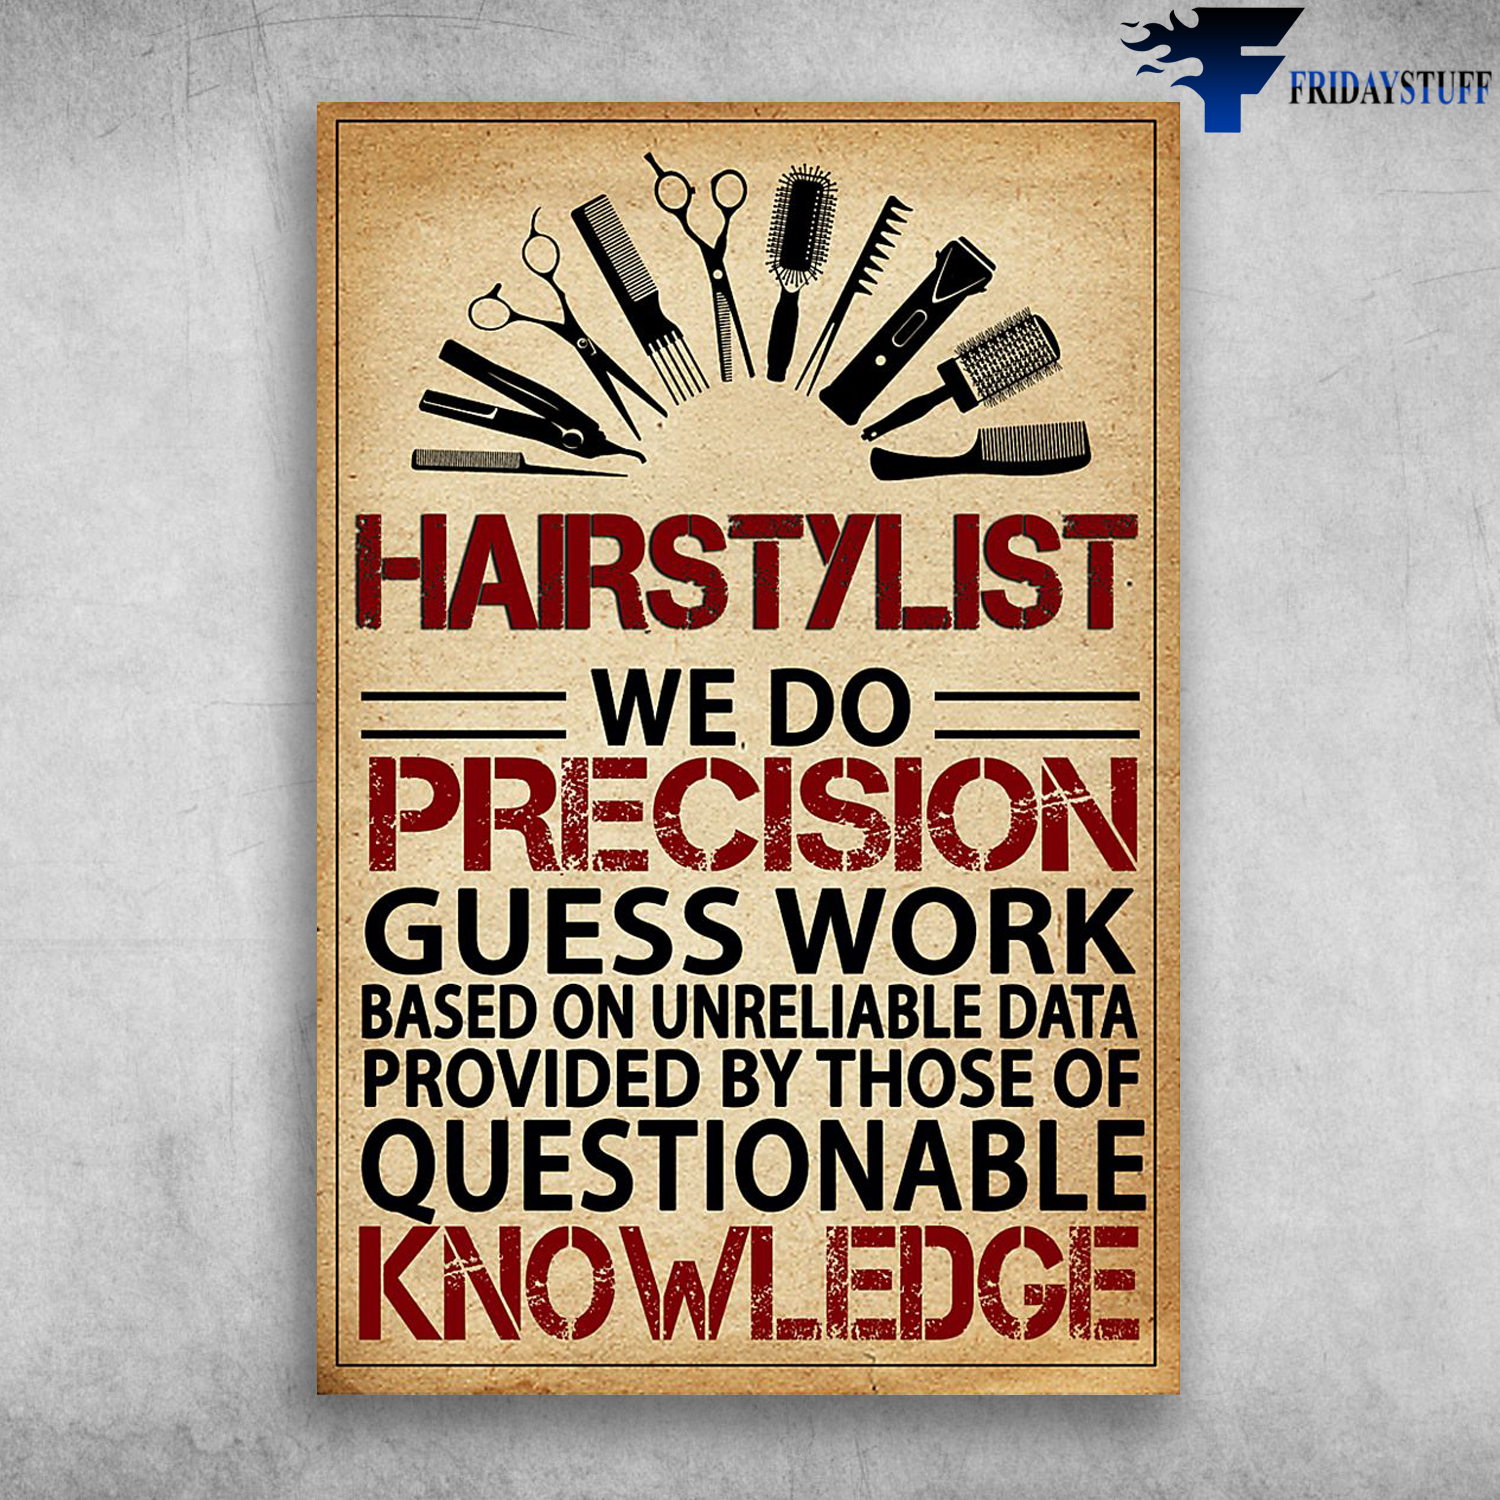 Hairstylist We Do Precision Guess Work Based On Unreliable Data